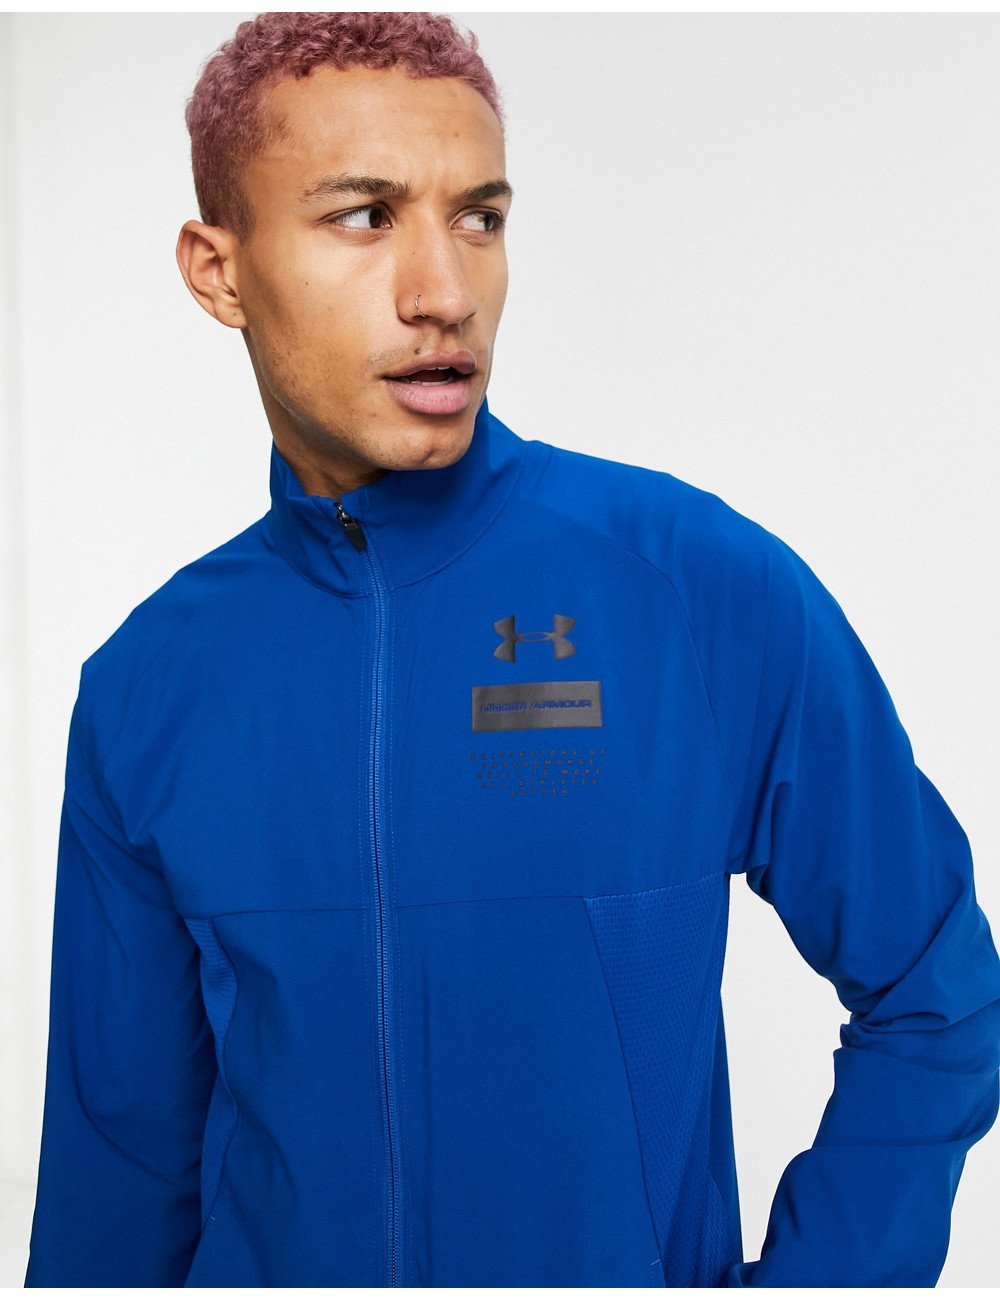 Under Armour jacket in blue